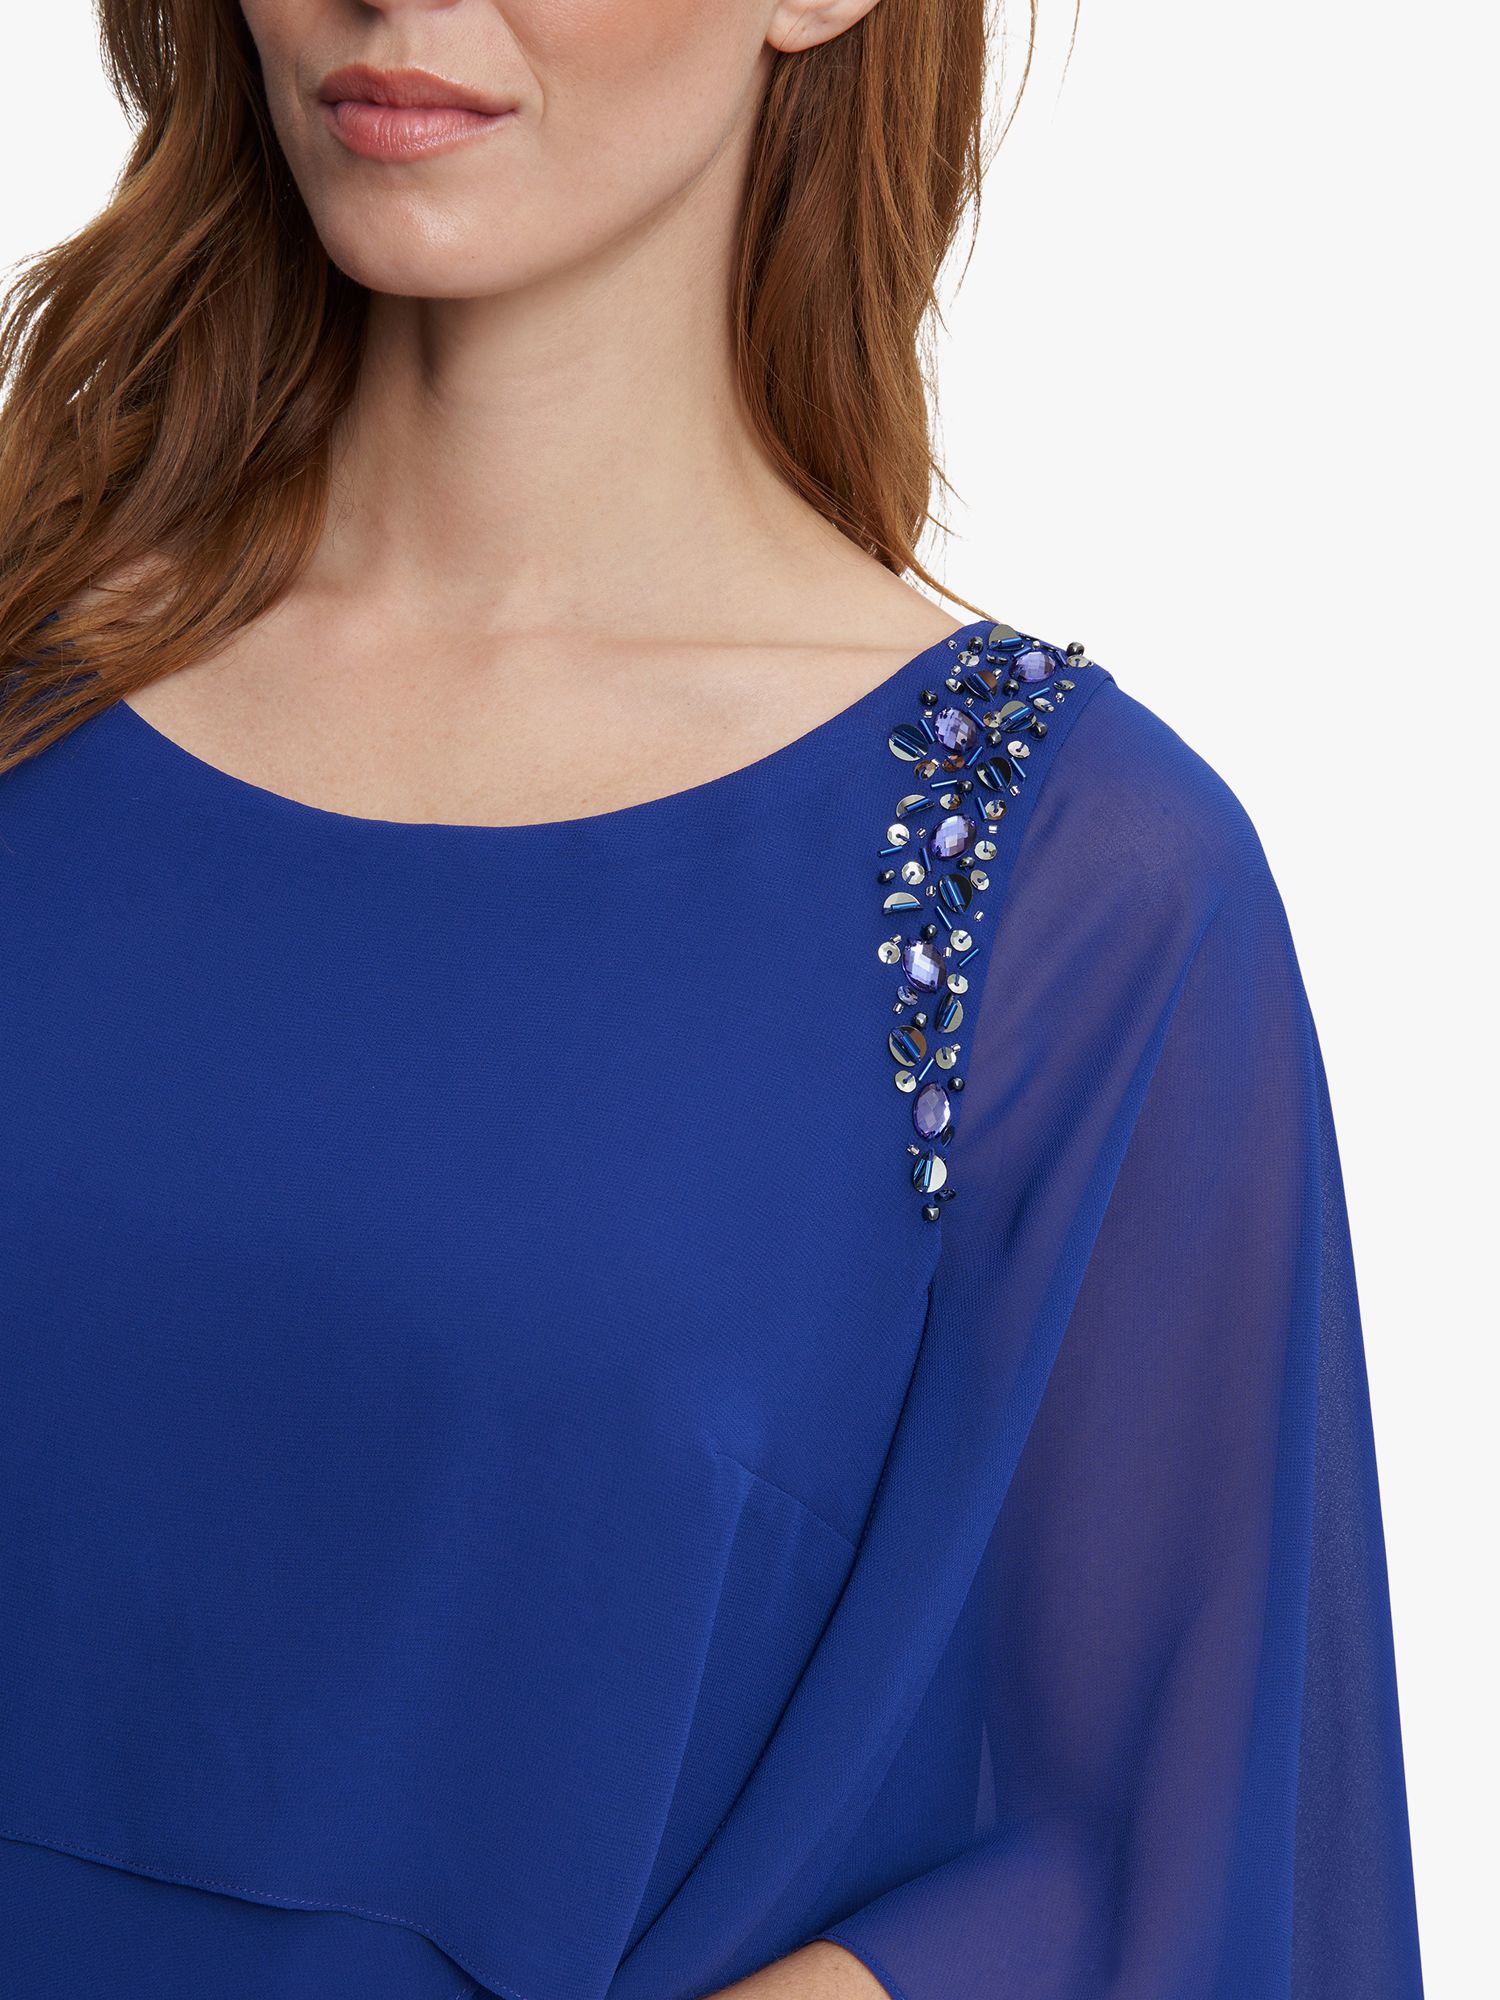 Buy Gina Bacconi Via Beaded Cape Tiered Dress, Royal Blue Online at johnlewis.com